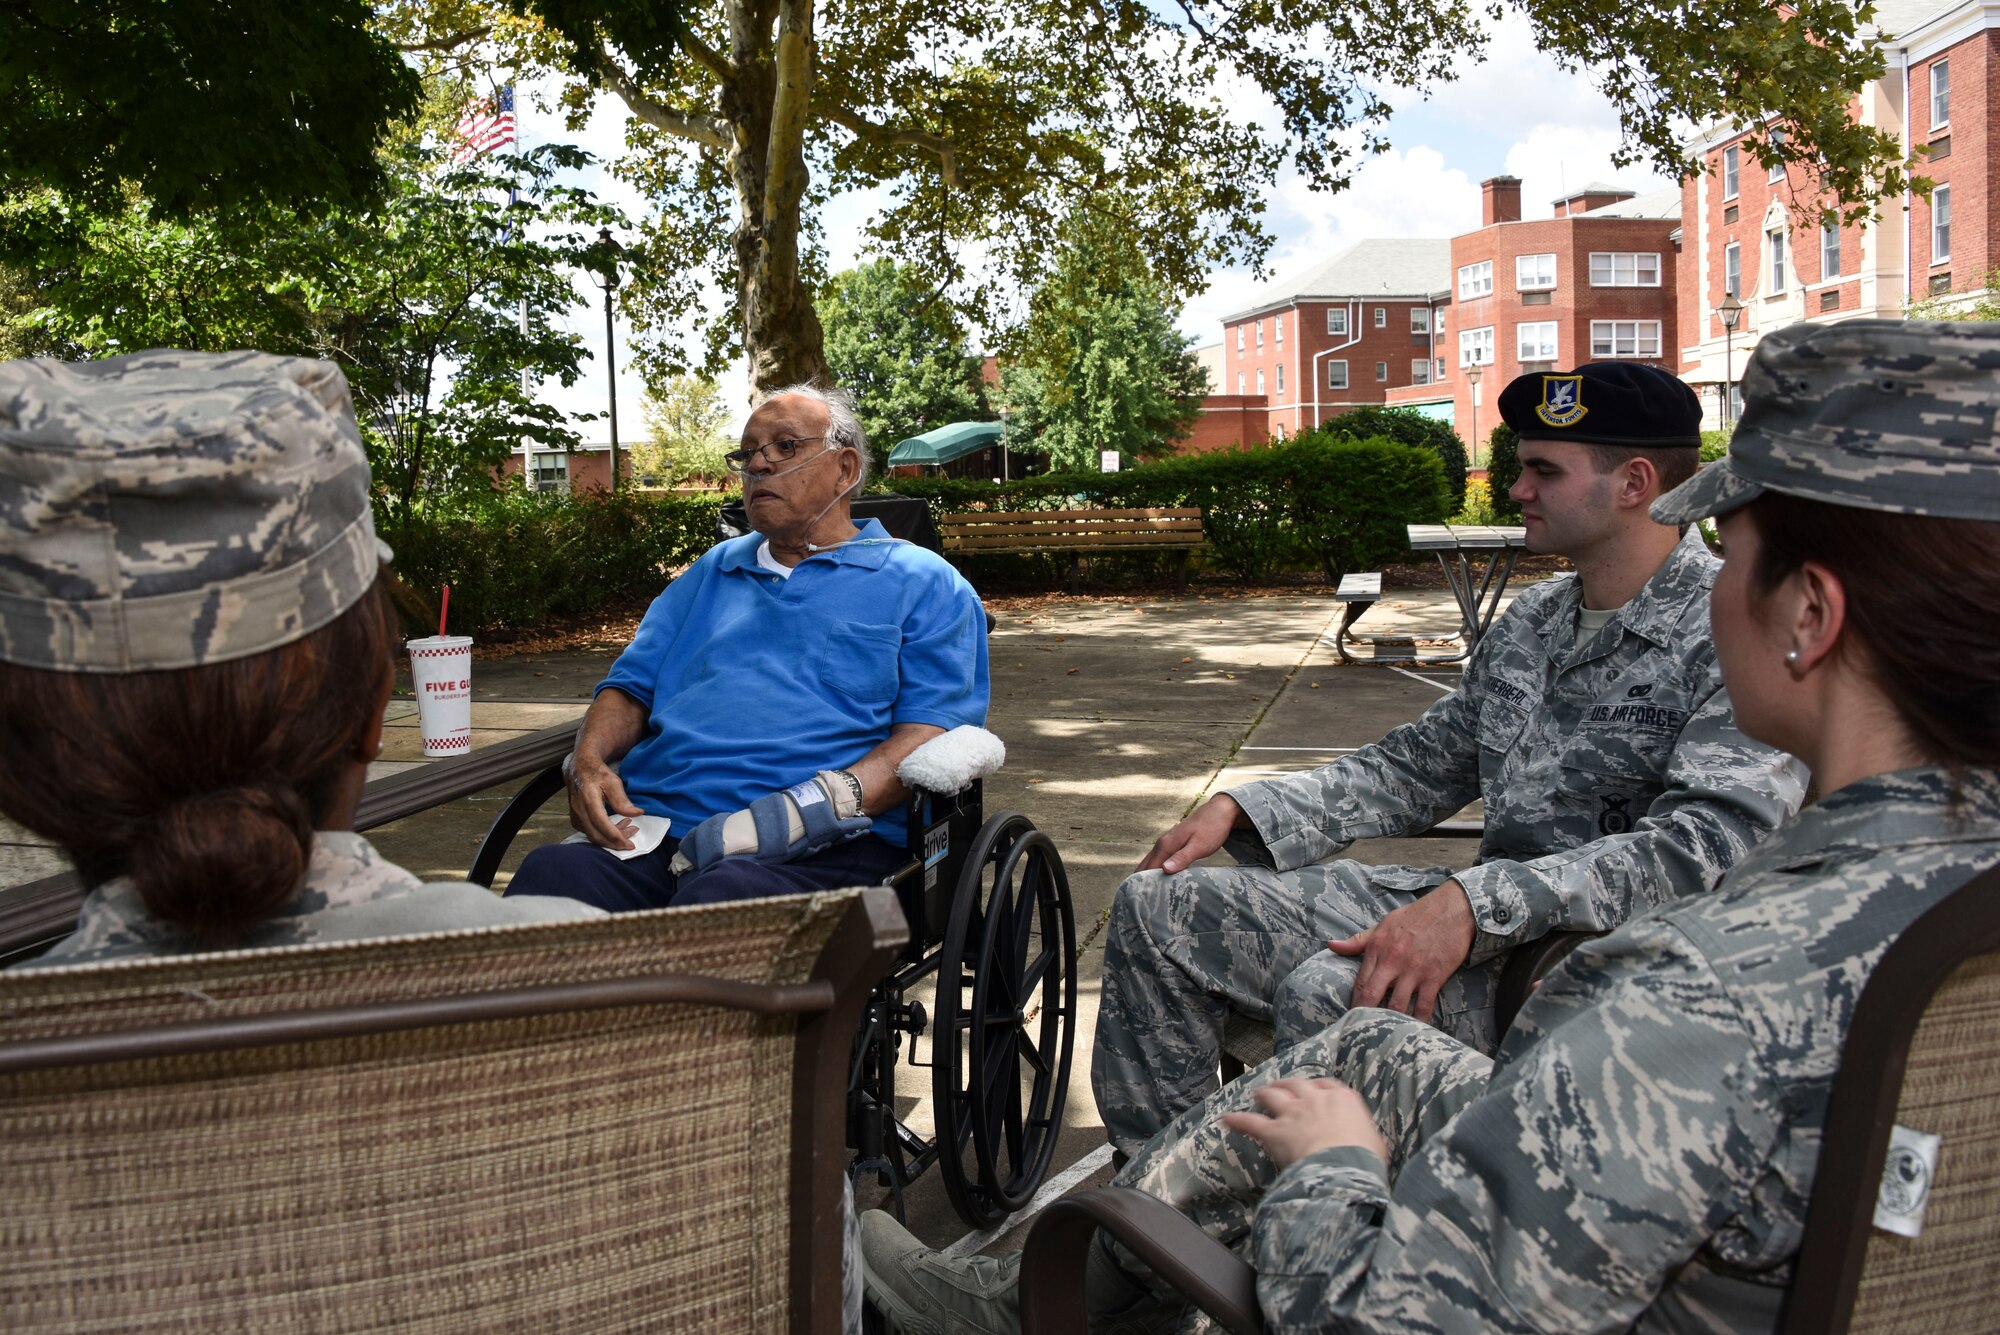 Kingsley Carey, a former Tuskegee Airman, speaks with members of the 911th Airlift Wing outside of a nursing home in Pittsburgh, Pa., Aug. 1, 2015. Carey, who is now 98 years-old, shared both good and bad memories so that the current generation of Airmen could benefit from his experience. (U.S. Air Force photo by Staff Sgt. Joshua J. Seybert)